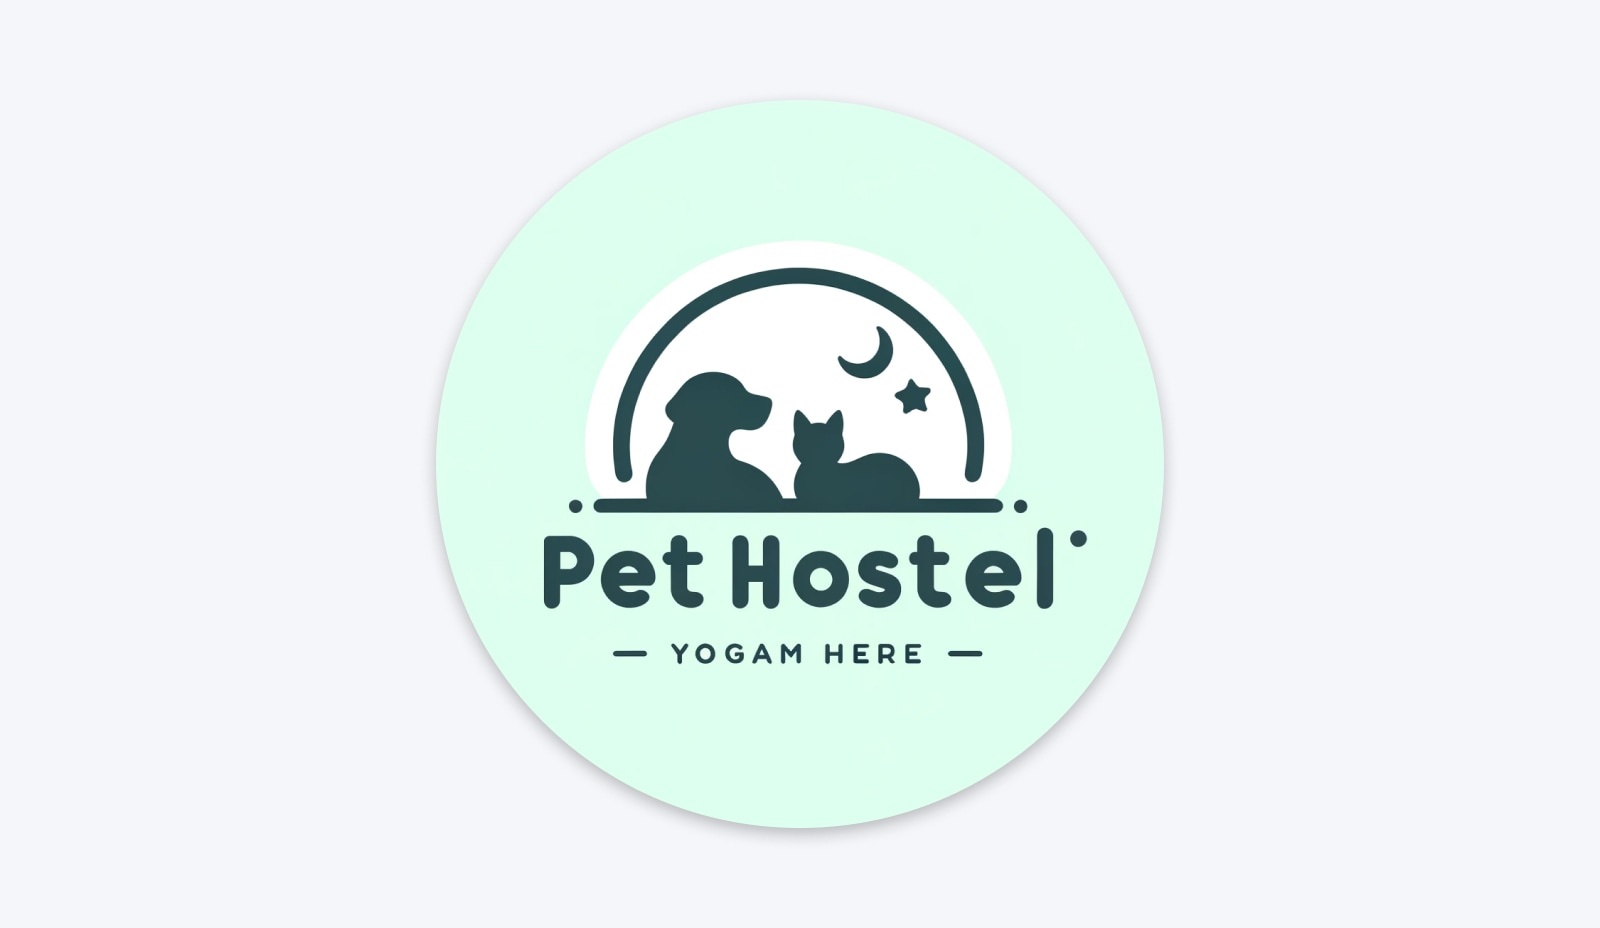 seafoam colored circle with a silhouette image of a dog sitting with a cat looking at a moon and star with "Pet Hostel yogam here" printed on it